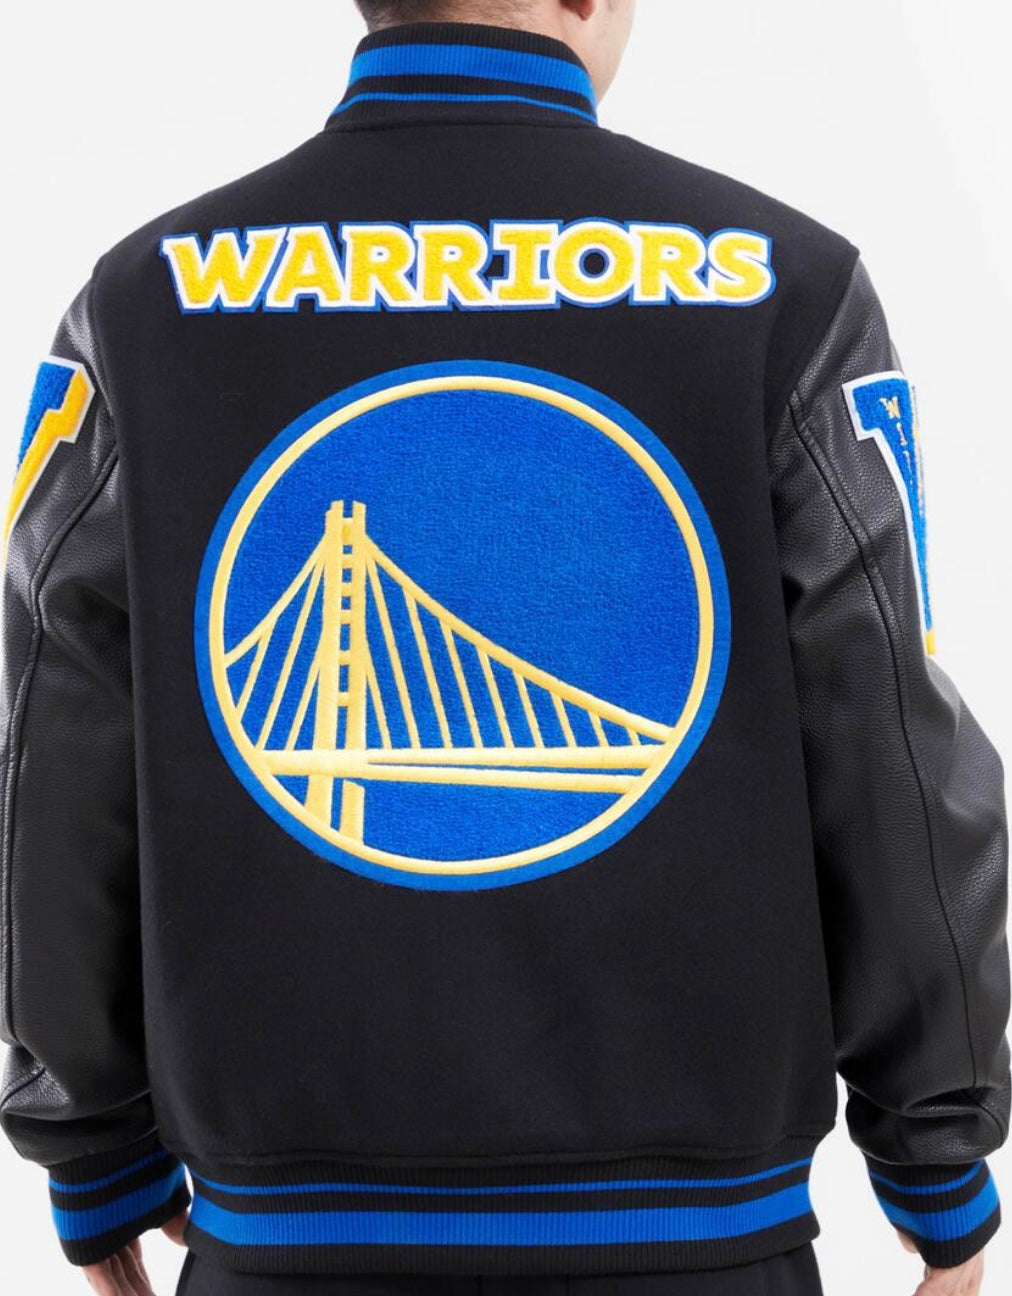 Official Golden State Warriors Jackets, Track Jackets, Pullovers, Coats